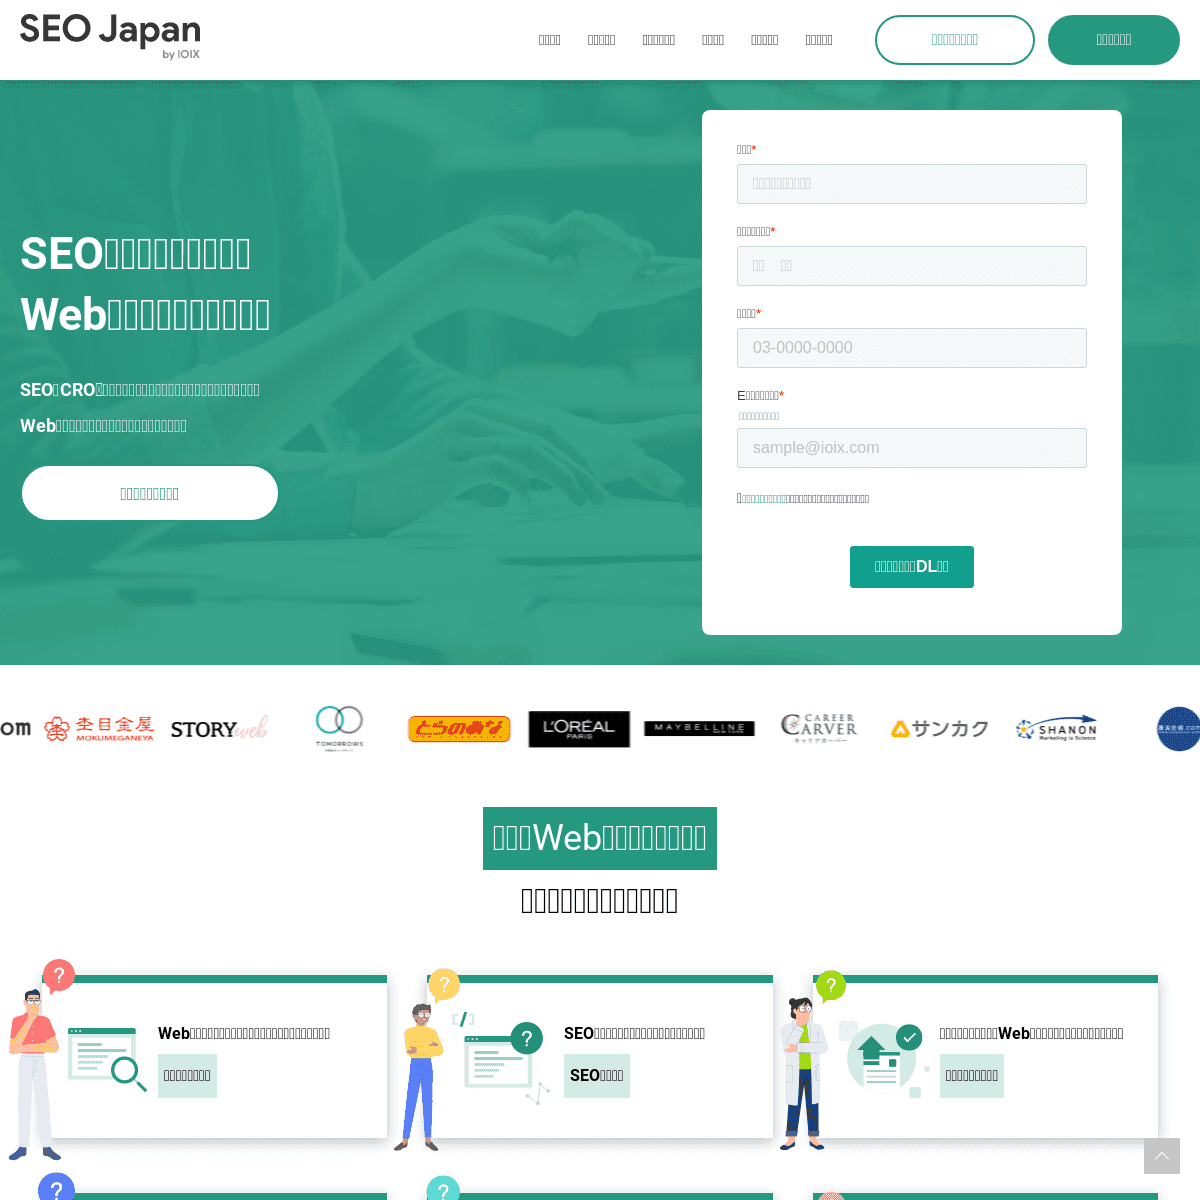 A complete backup of https://seojapan.com